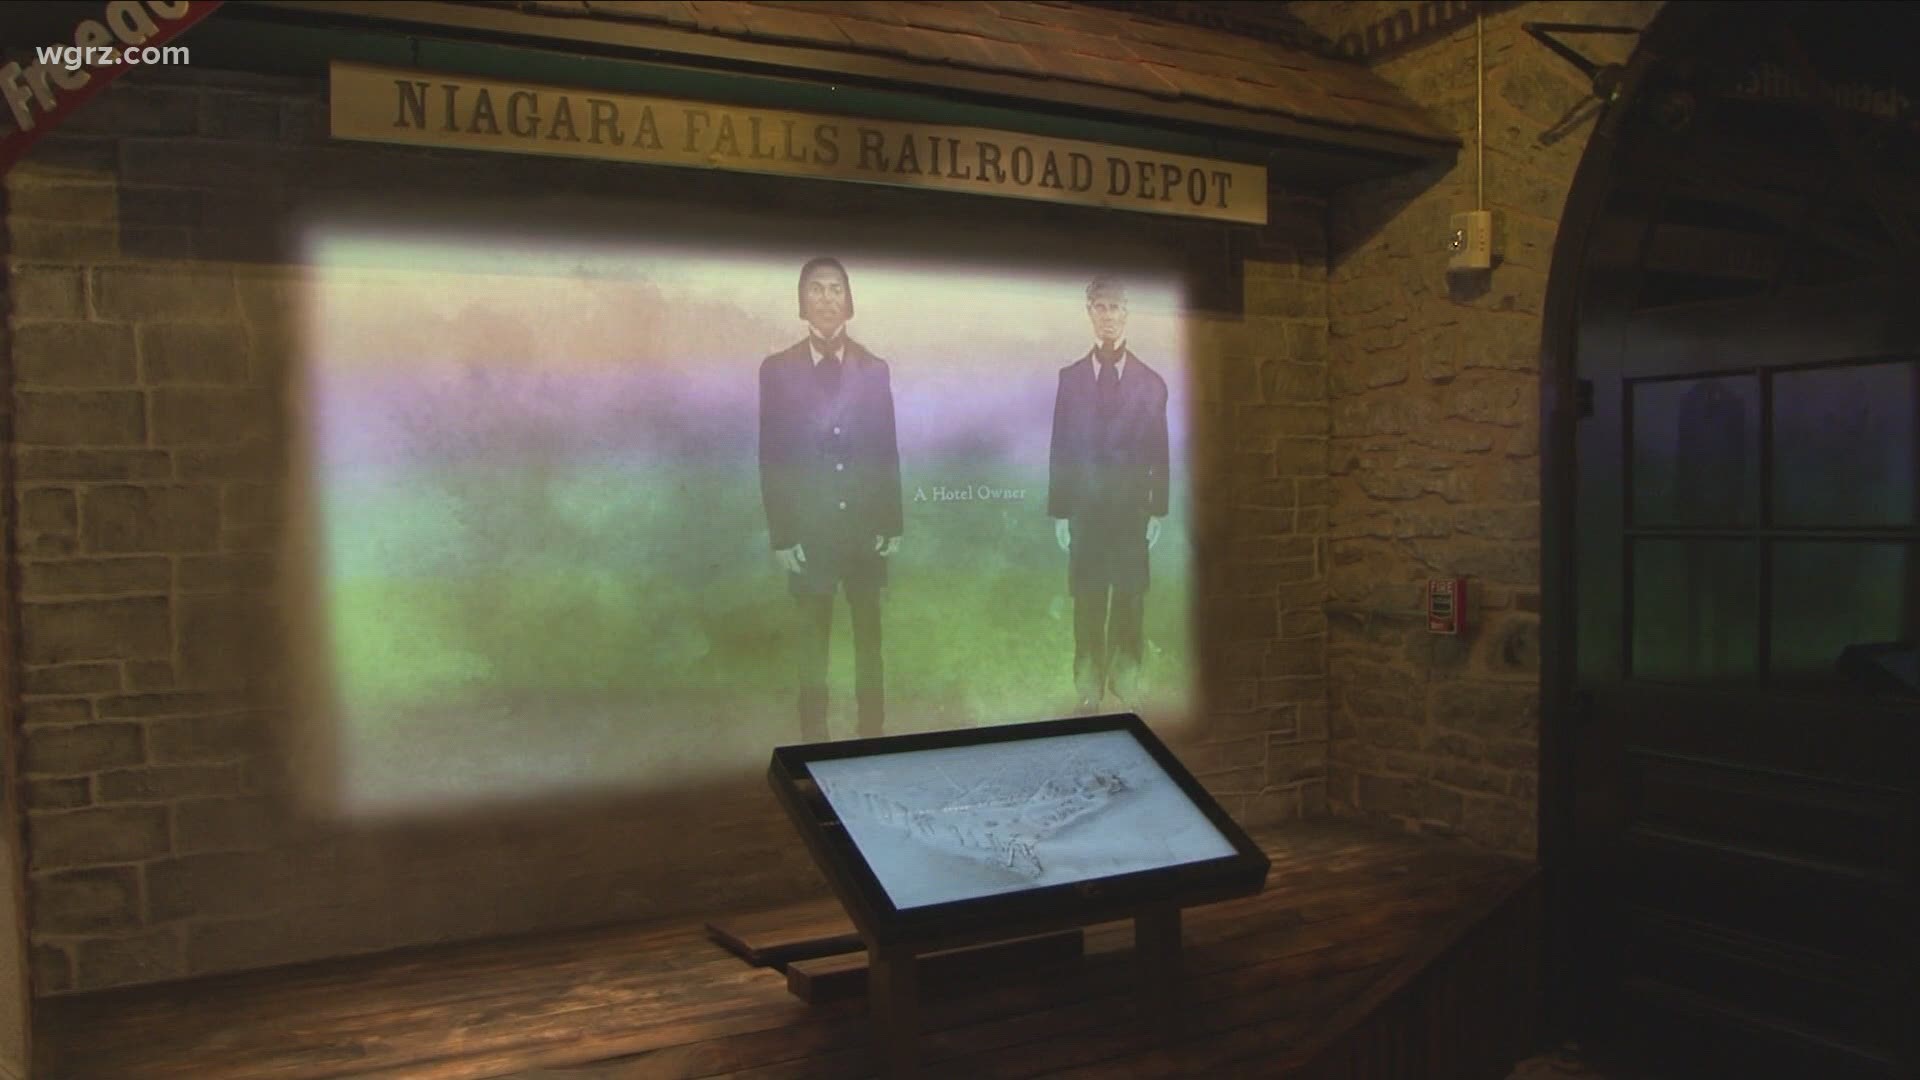 Underground Railroad Heritage Center shows off WNY's role in history